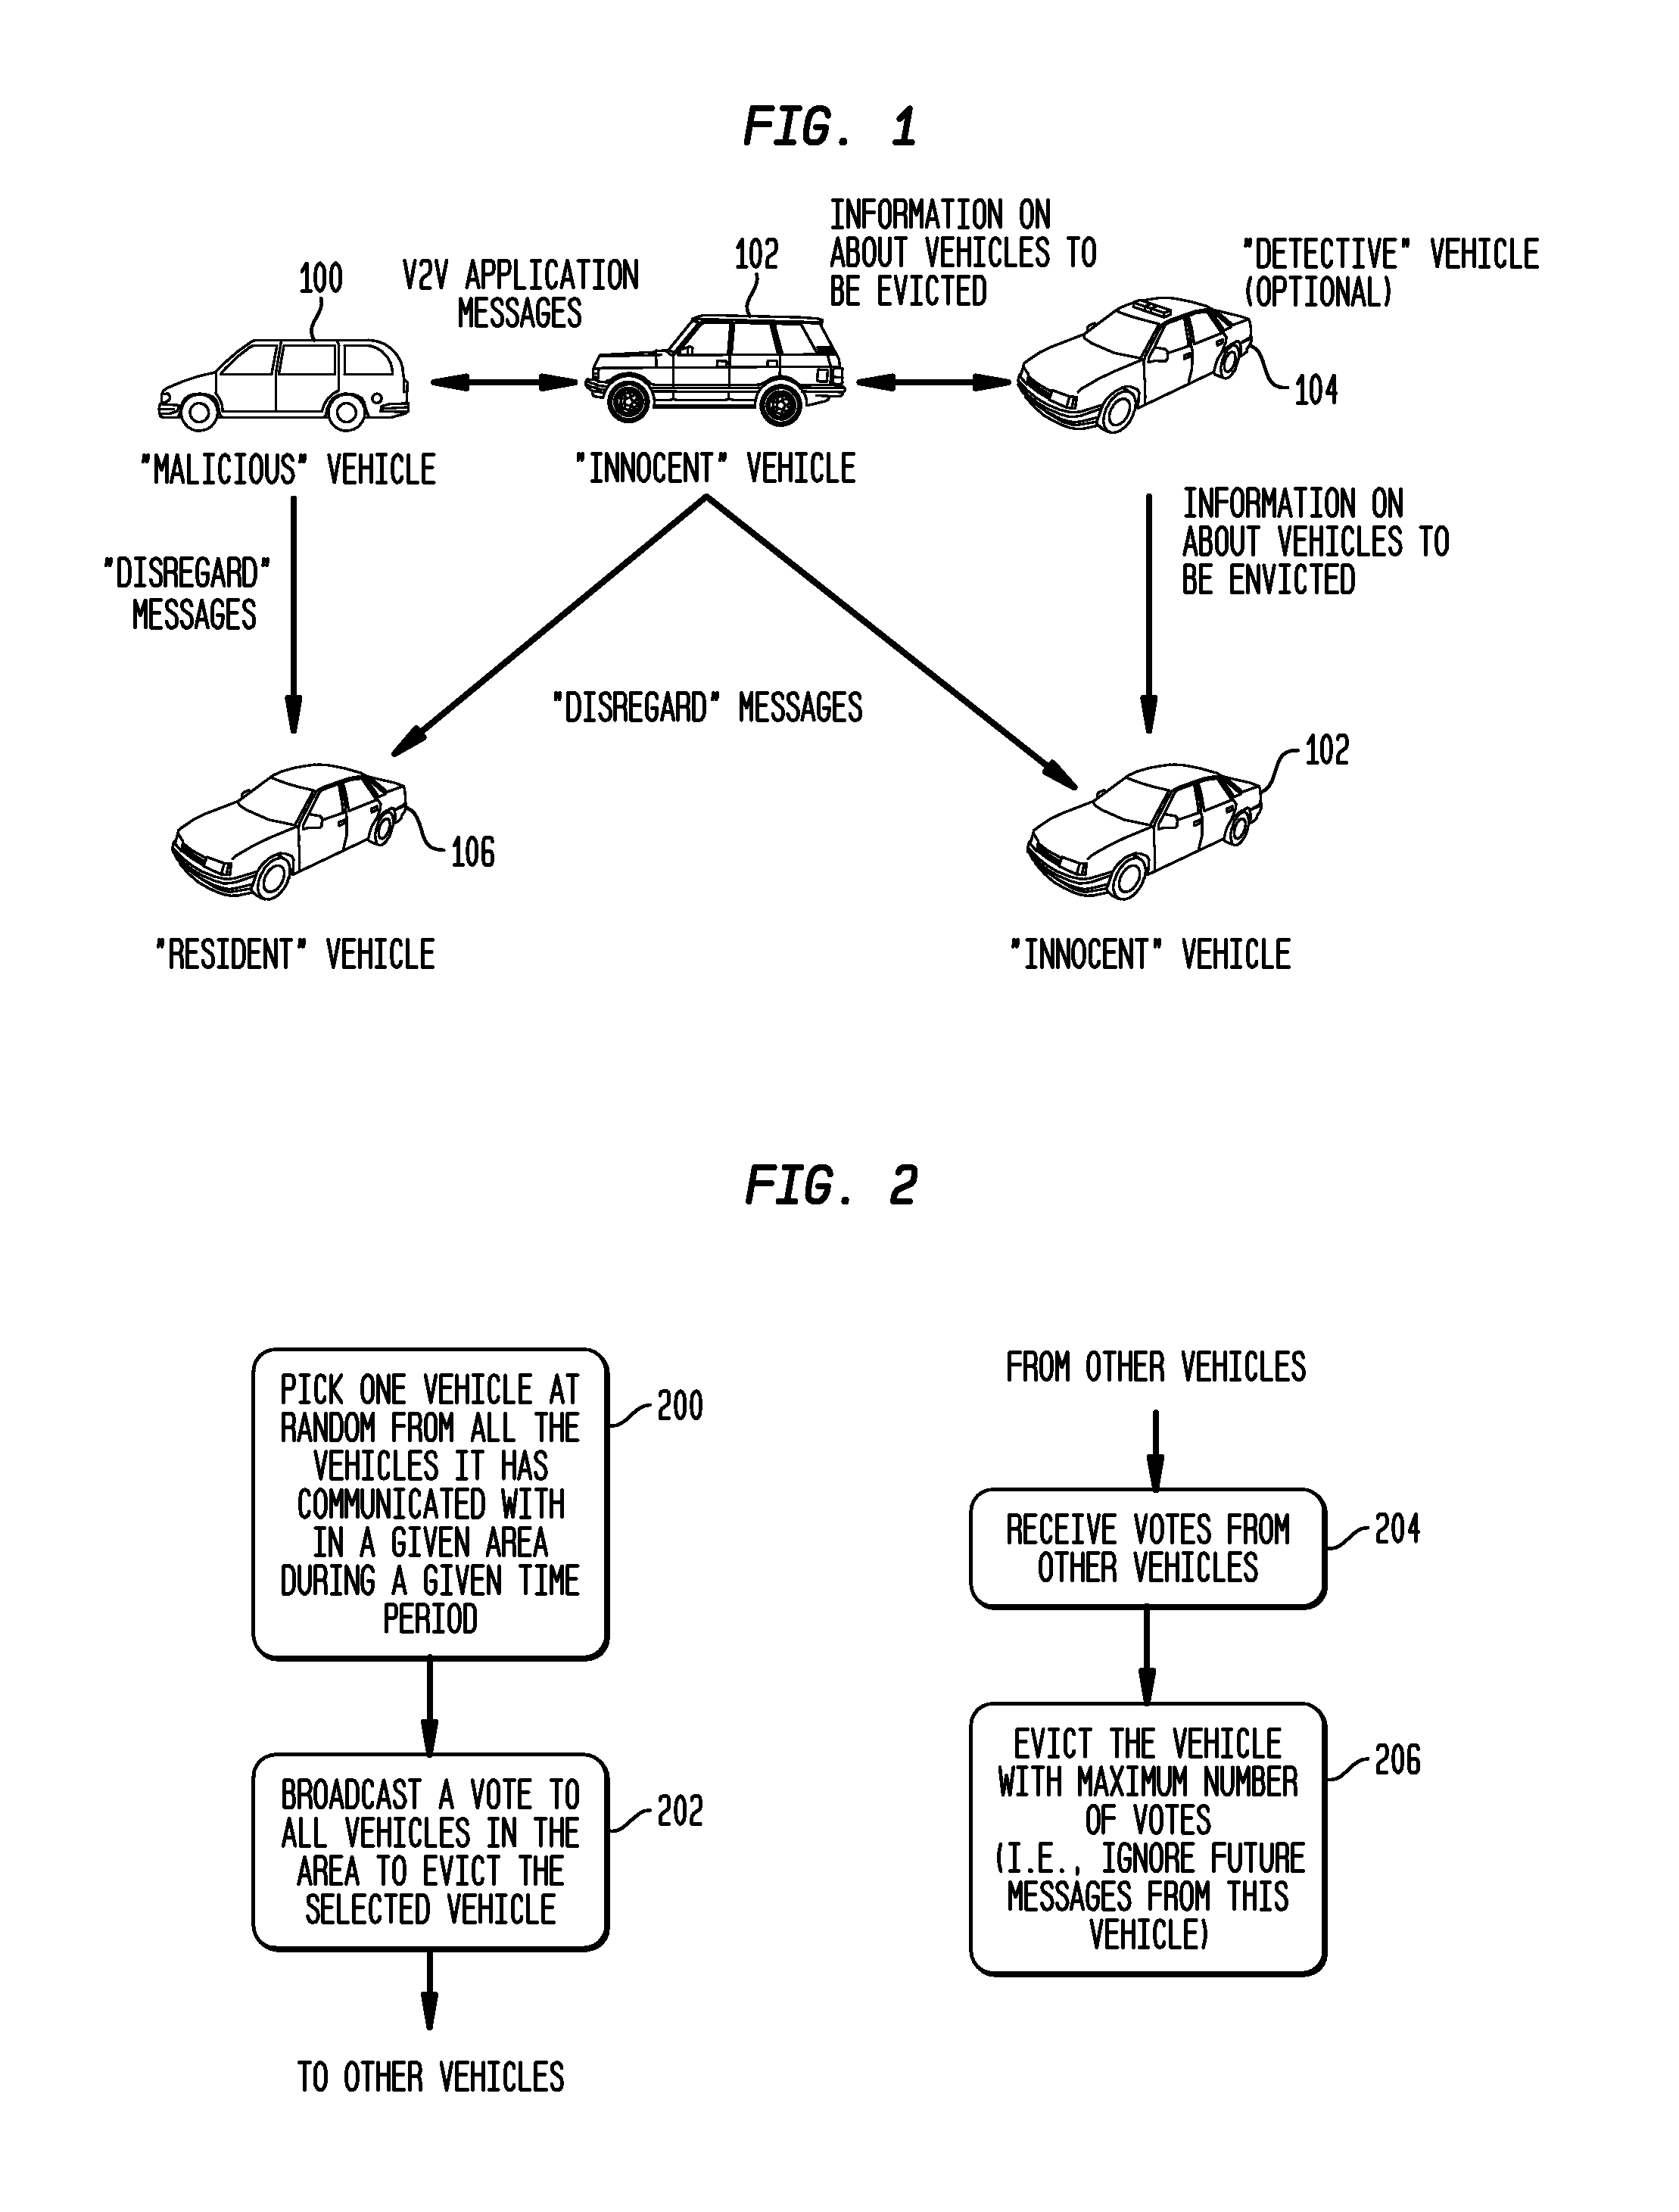 System and Method for Detecting and Evicting Malicious Vehicles in a Vehicle Communications Network